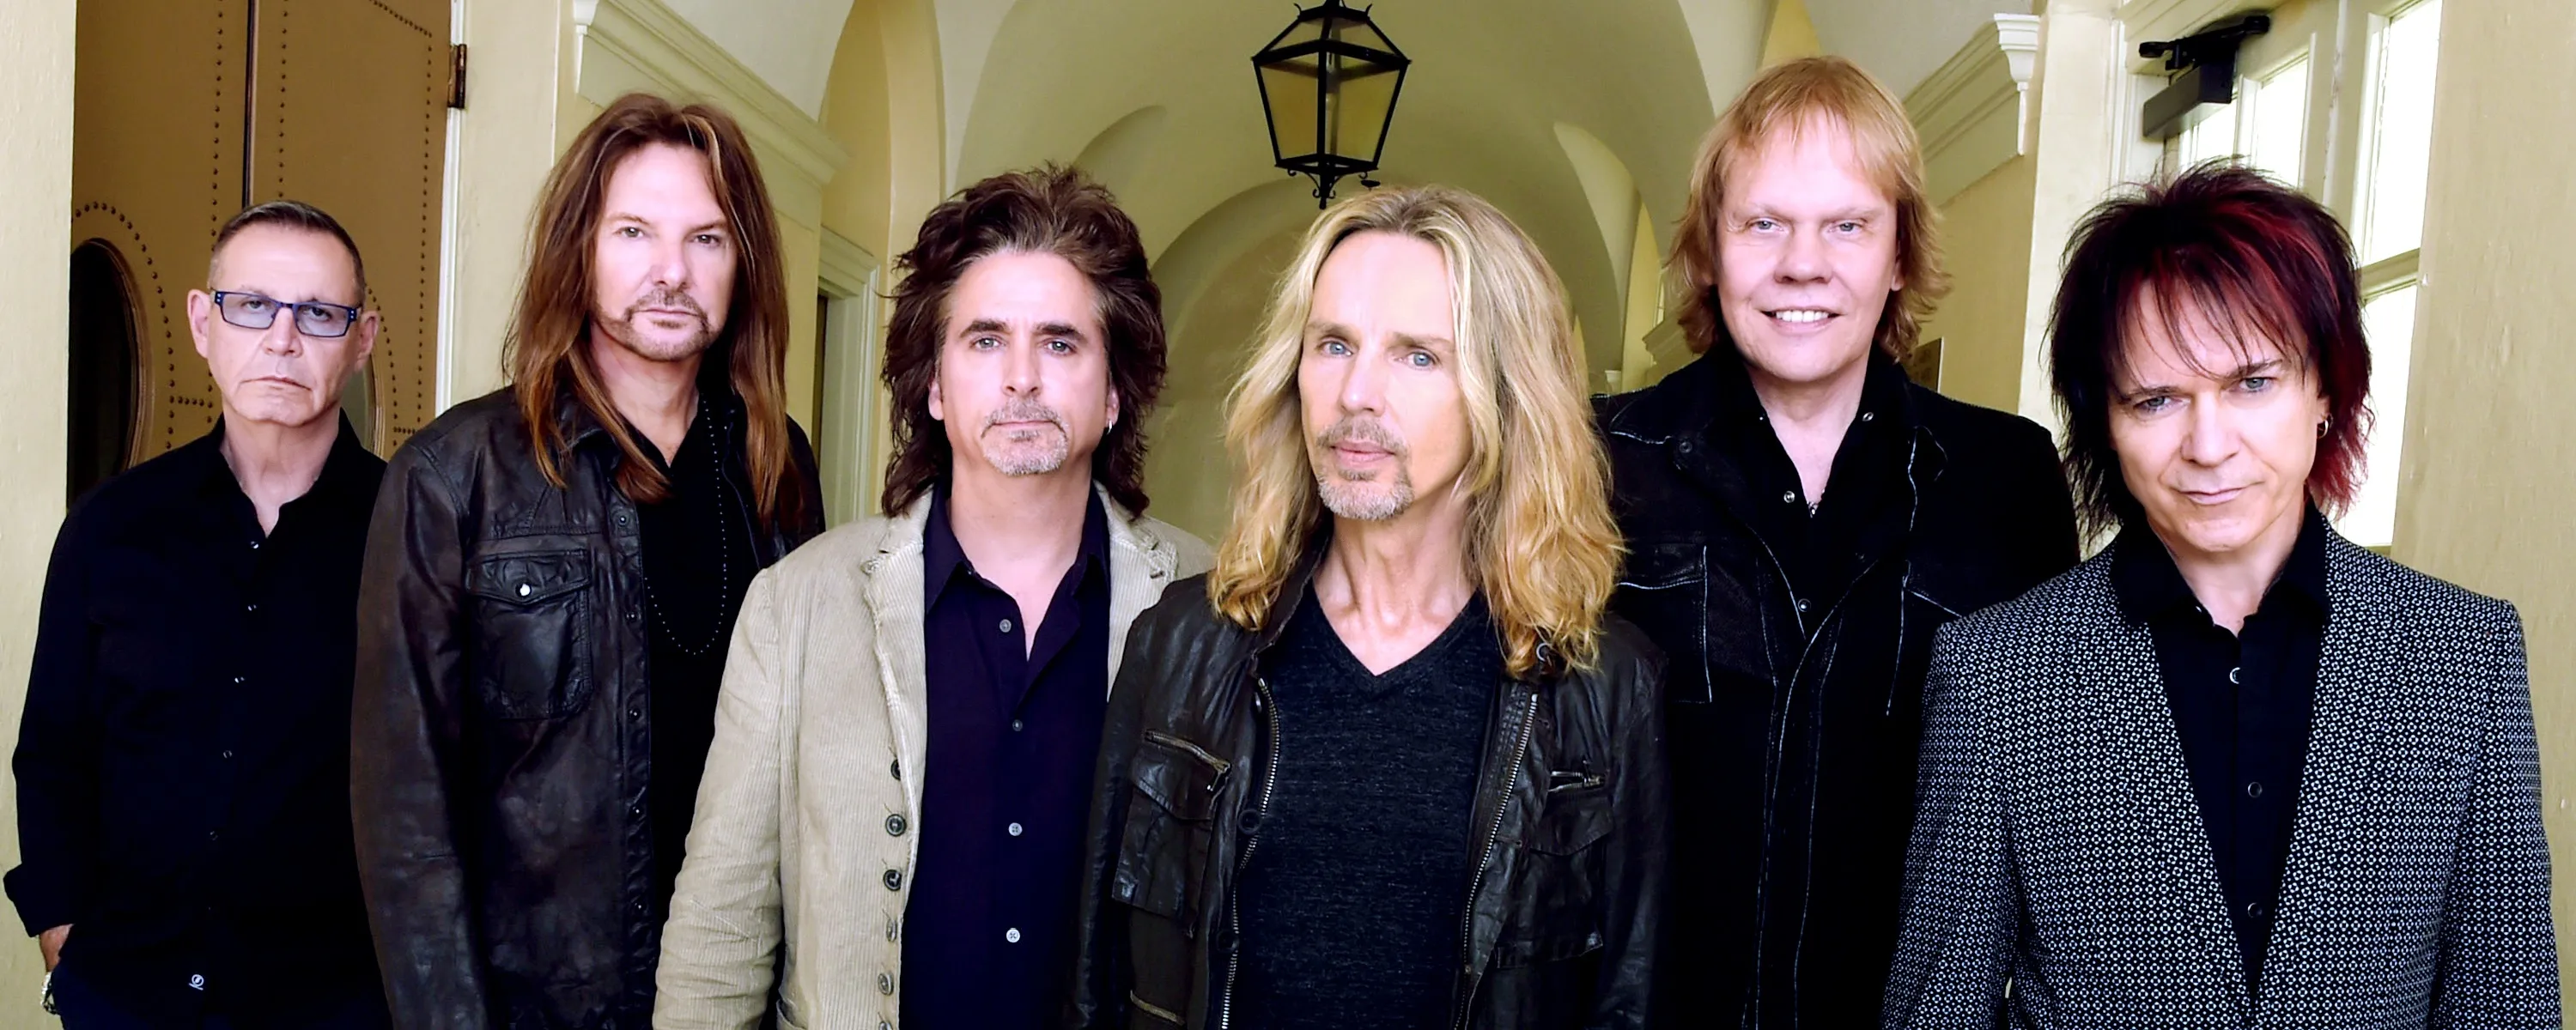 Behind The Song: “Boat On The River” by Styx